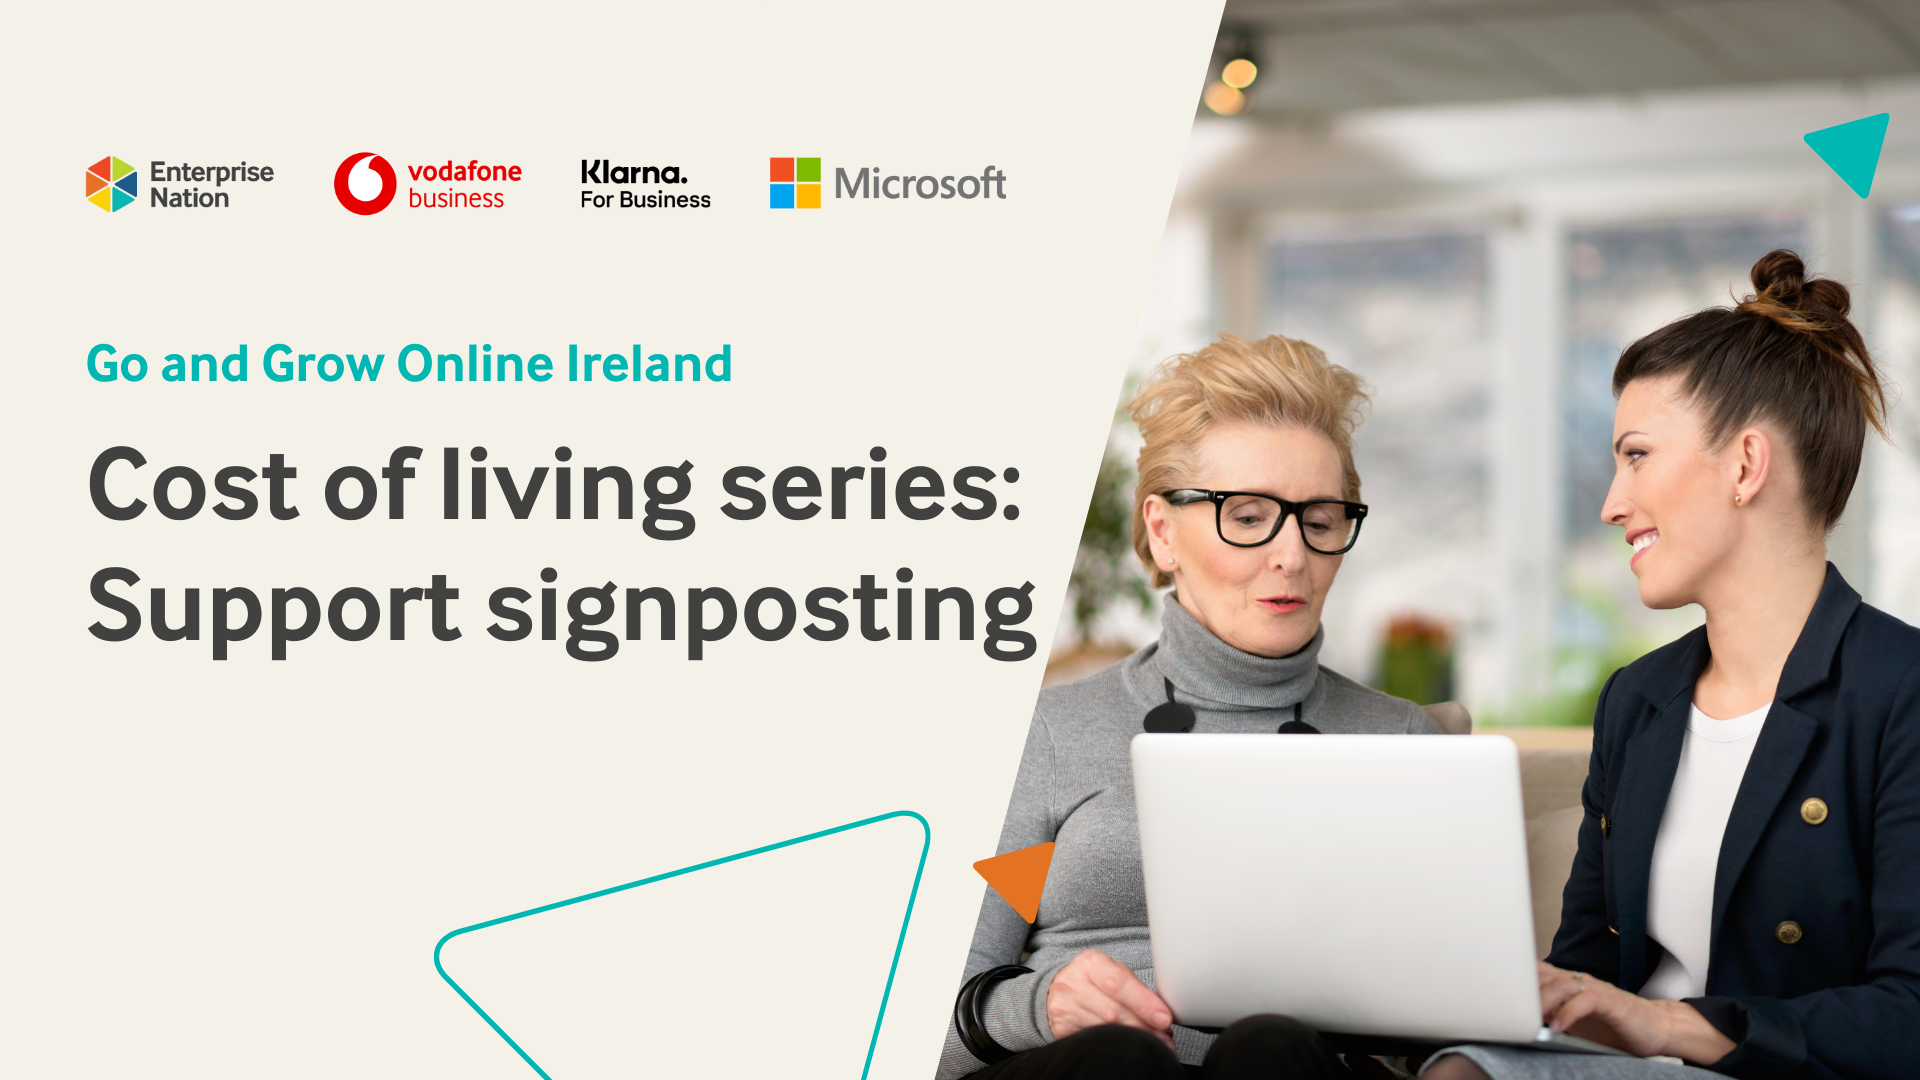 Go and Grow Online: Cost of living series - Support signposting